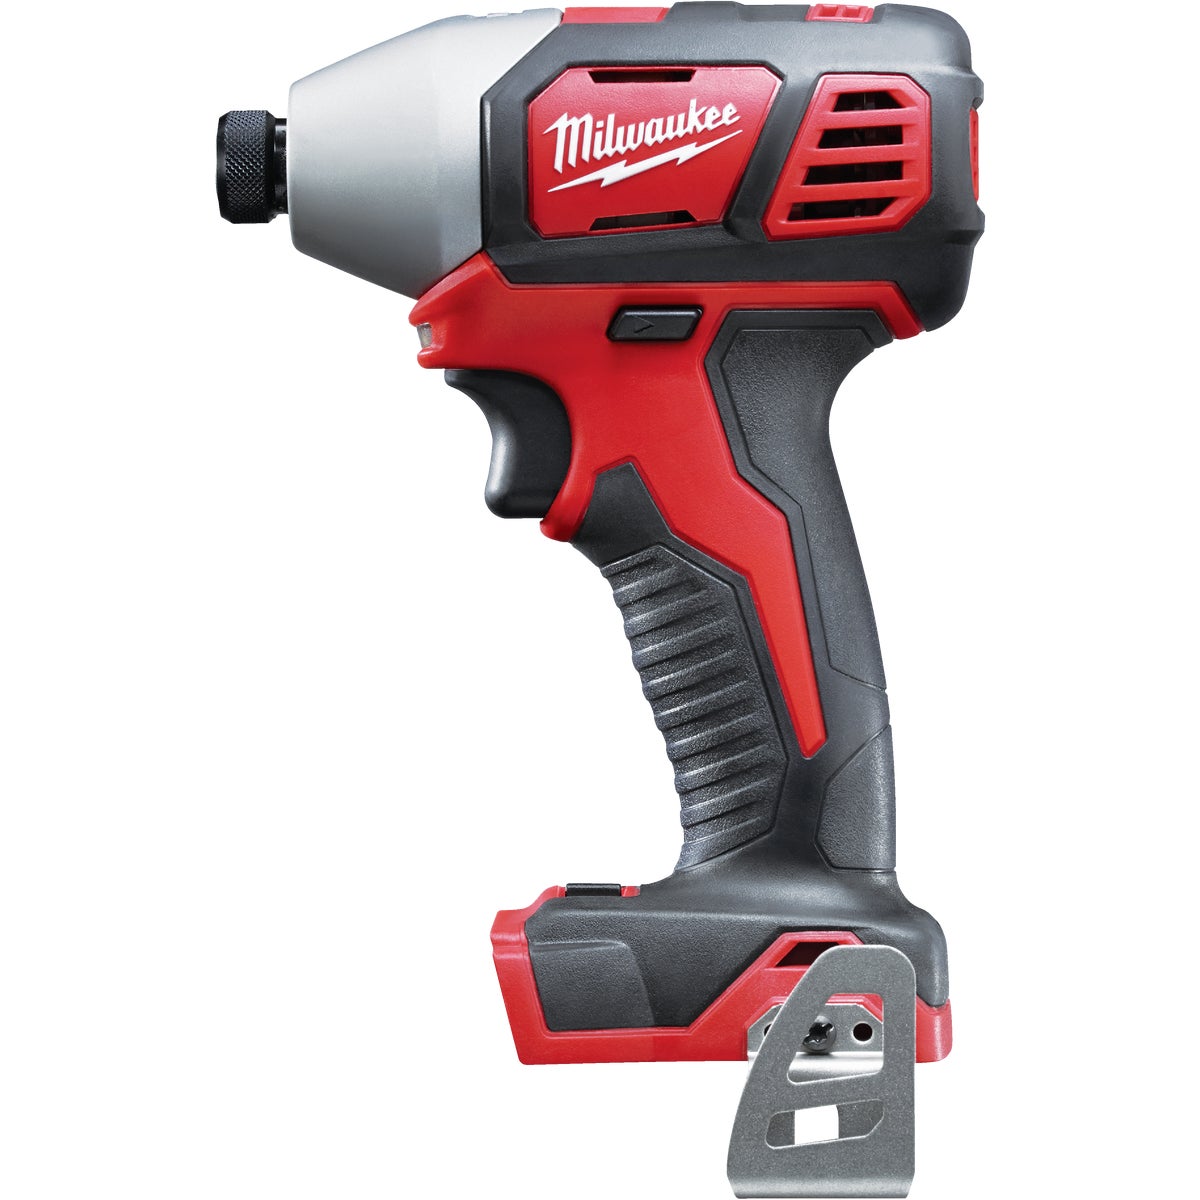 Item 303262, The M18 Cordless 2-Speed 1/4" Hex Impact Driver is the most powerful 1/4" 